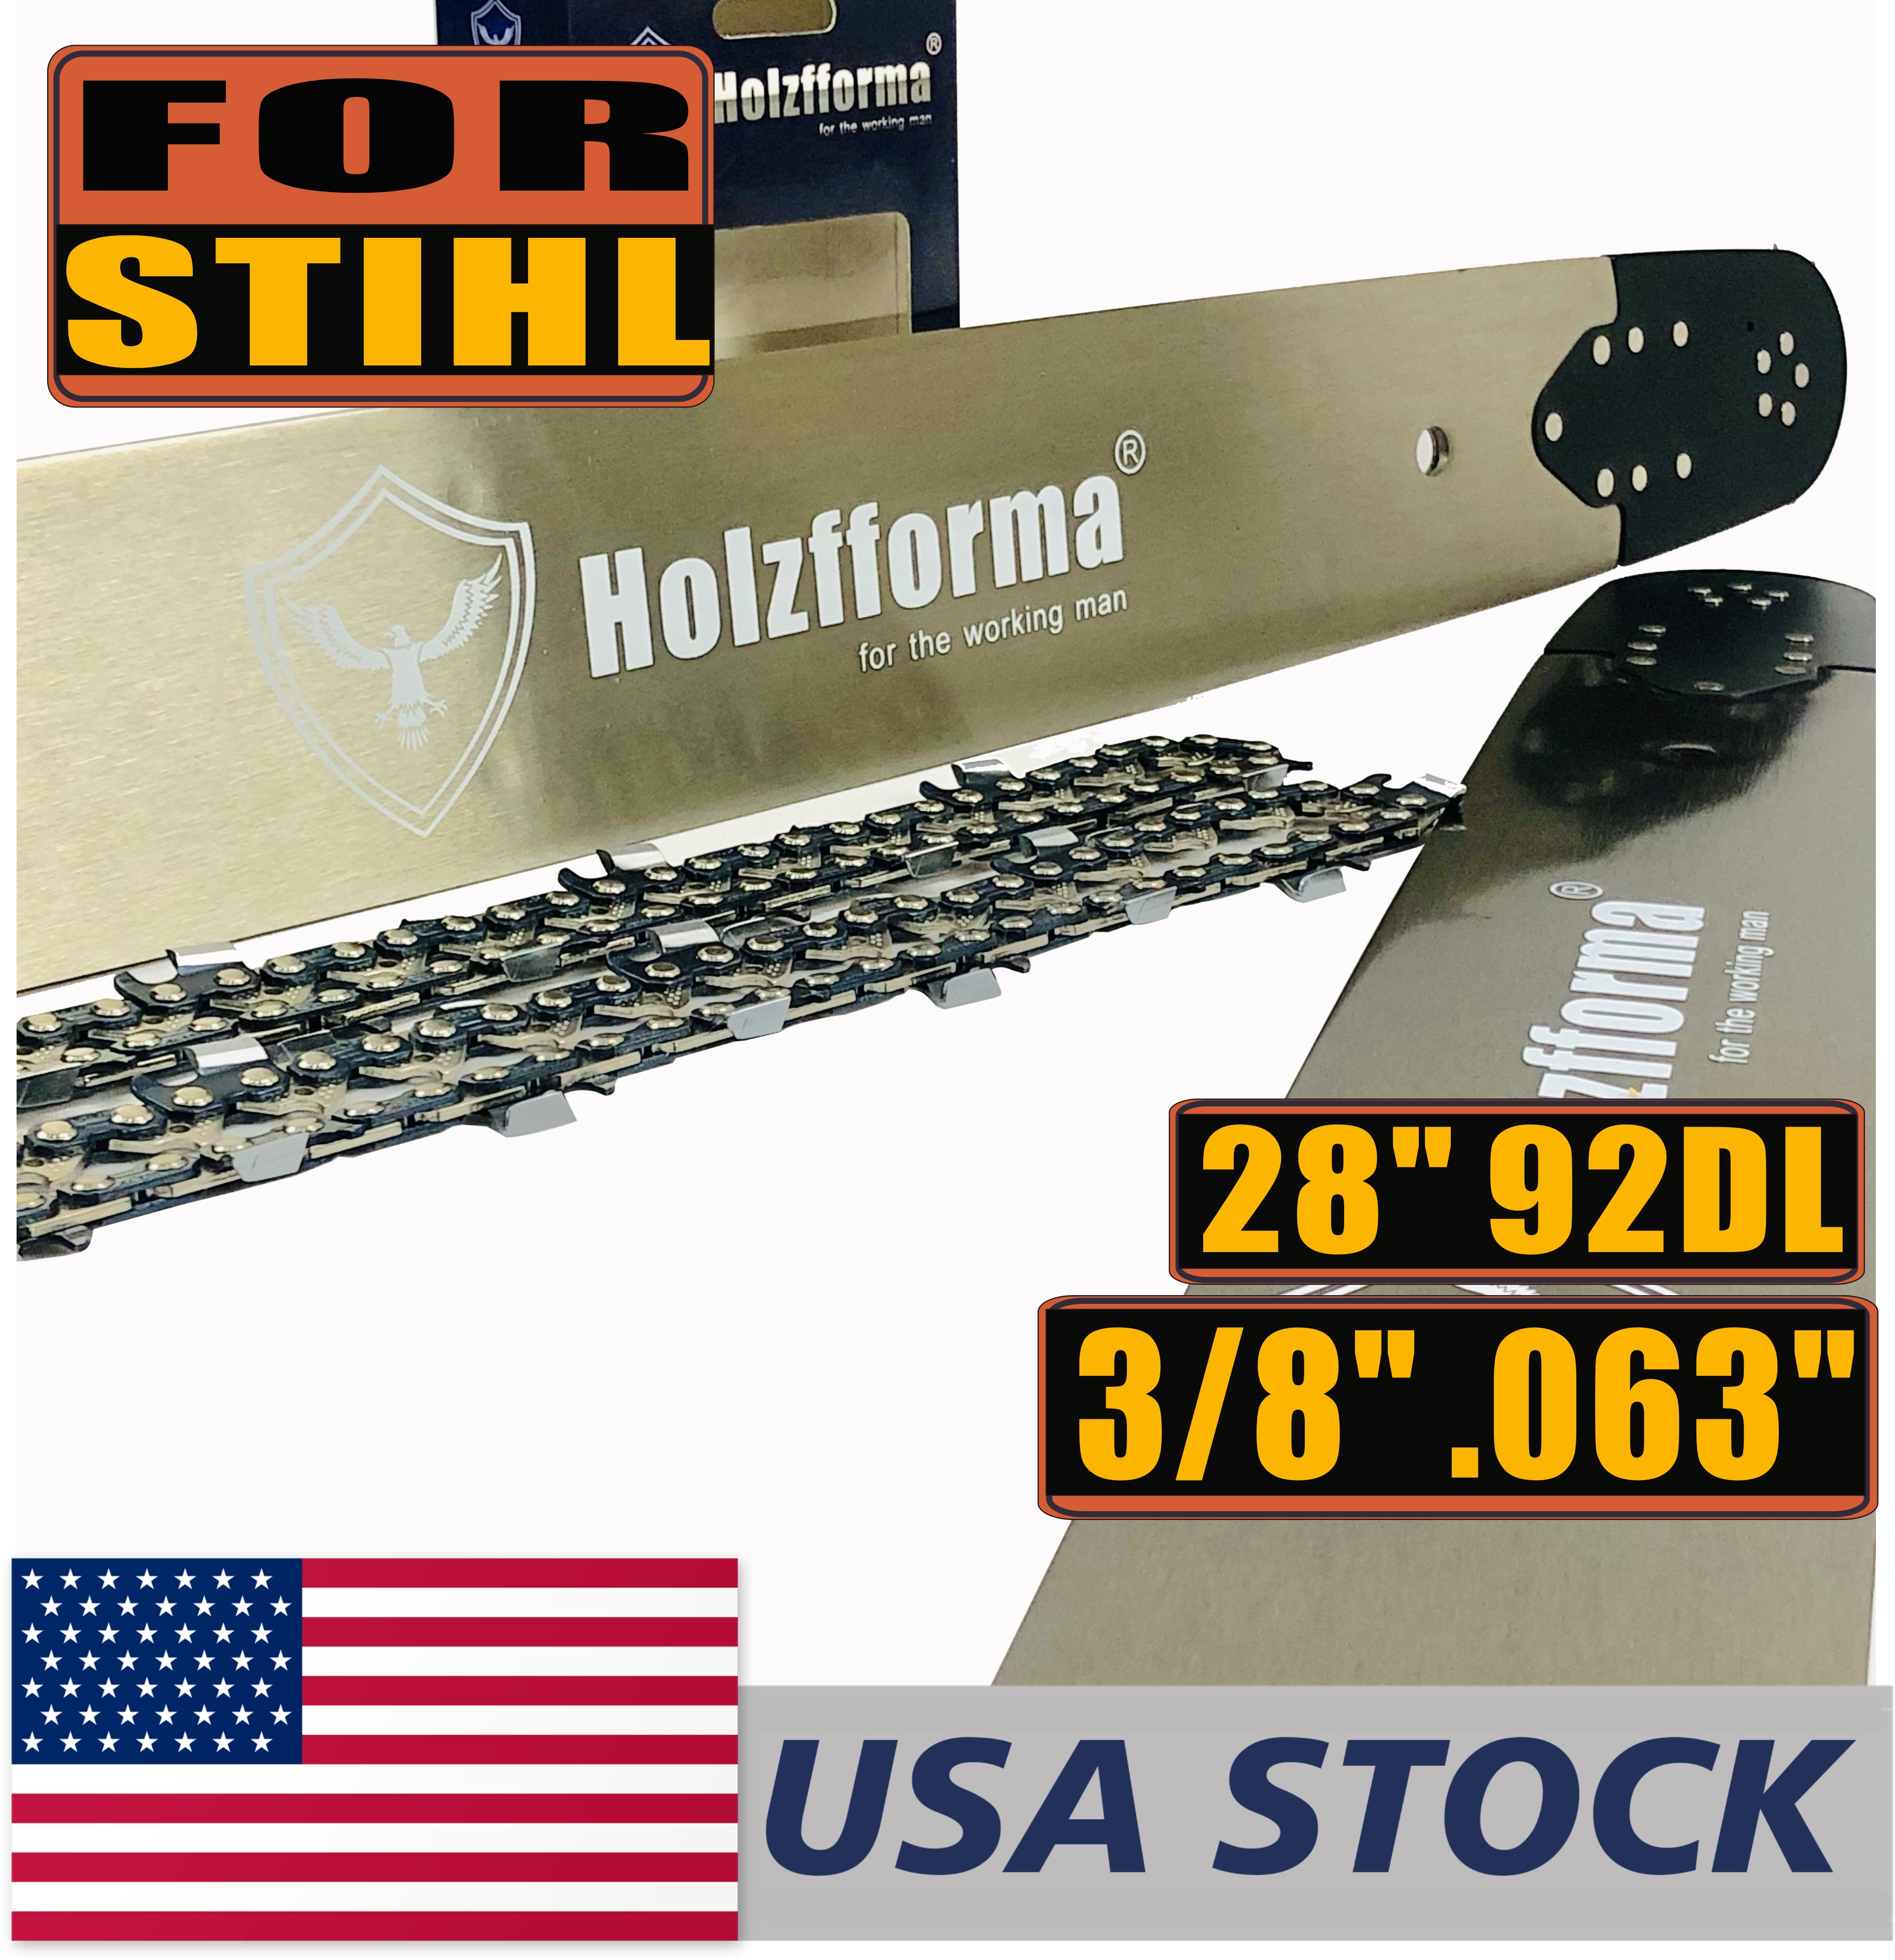 US STOCK - Holzfforma® 28inch Guide Bar & Full Chisel Saw Chain Combo 3/8 .063 92DL For Stihl MS361 MS362 MS380 MS390 MS440 MS441 MS460 MS461 MS660 MS661 MS650 2-4 Days Delivery Time Fast Shipping For US Customers Only